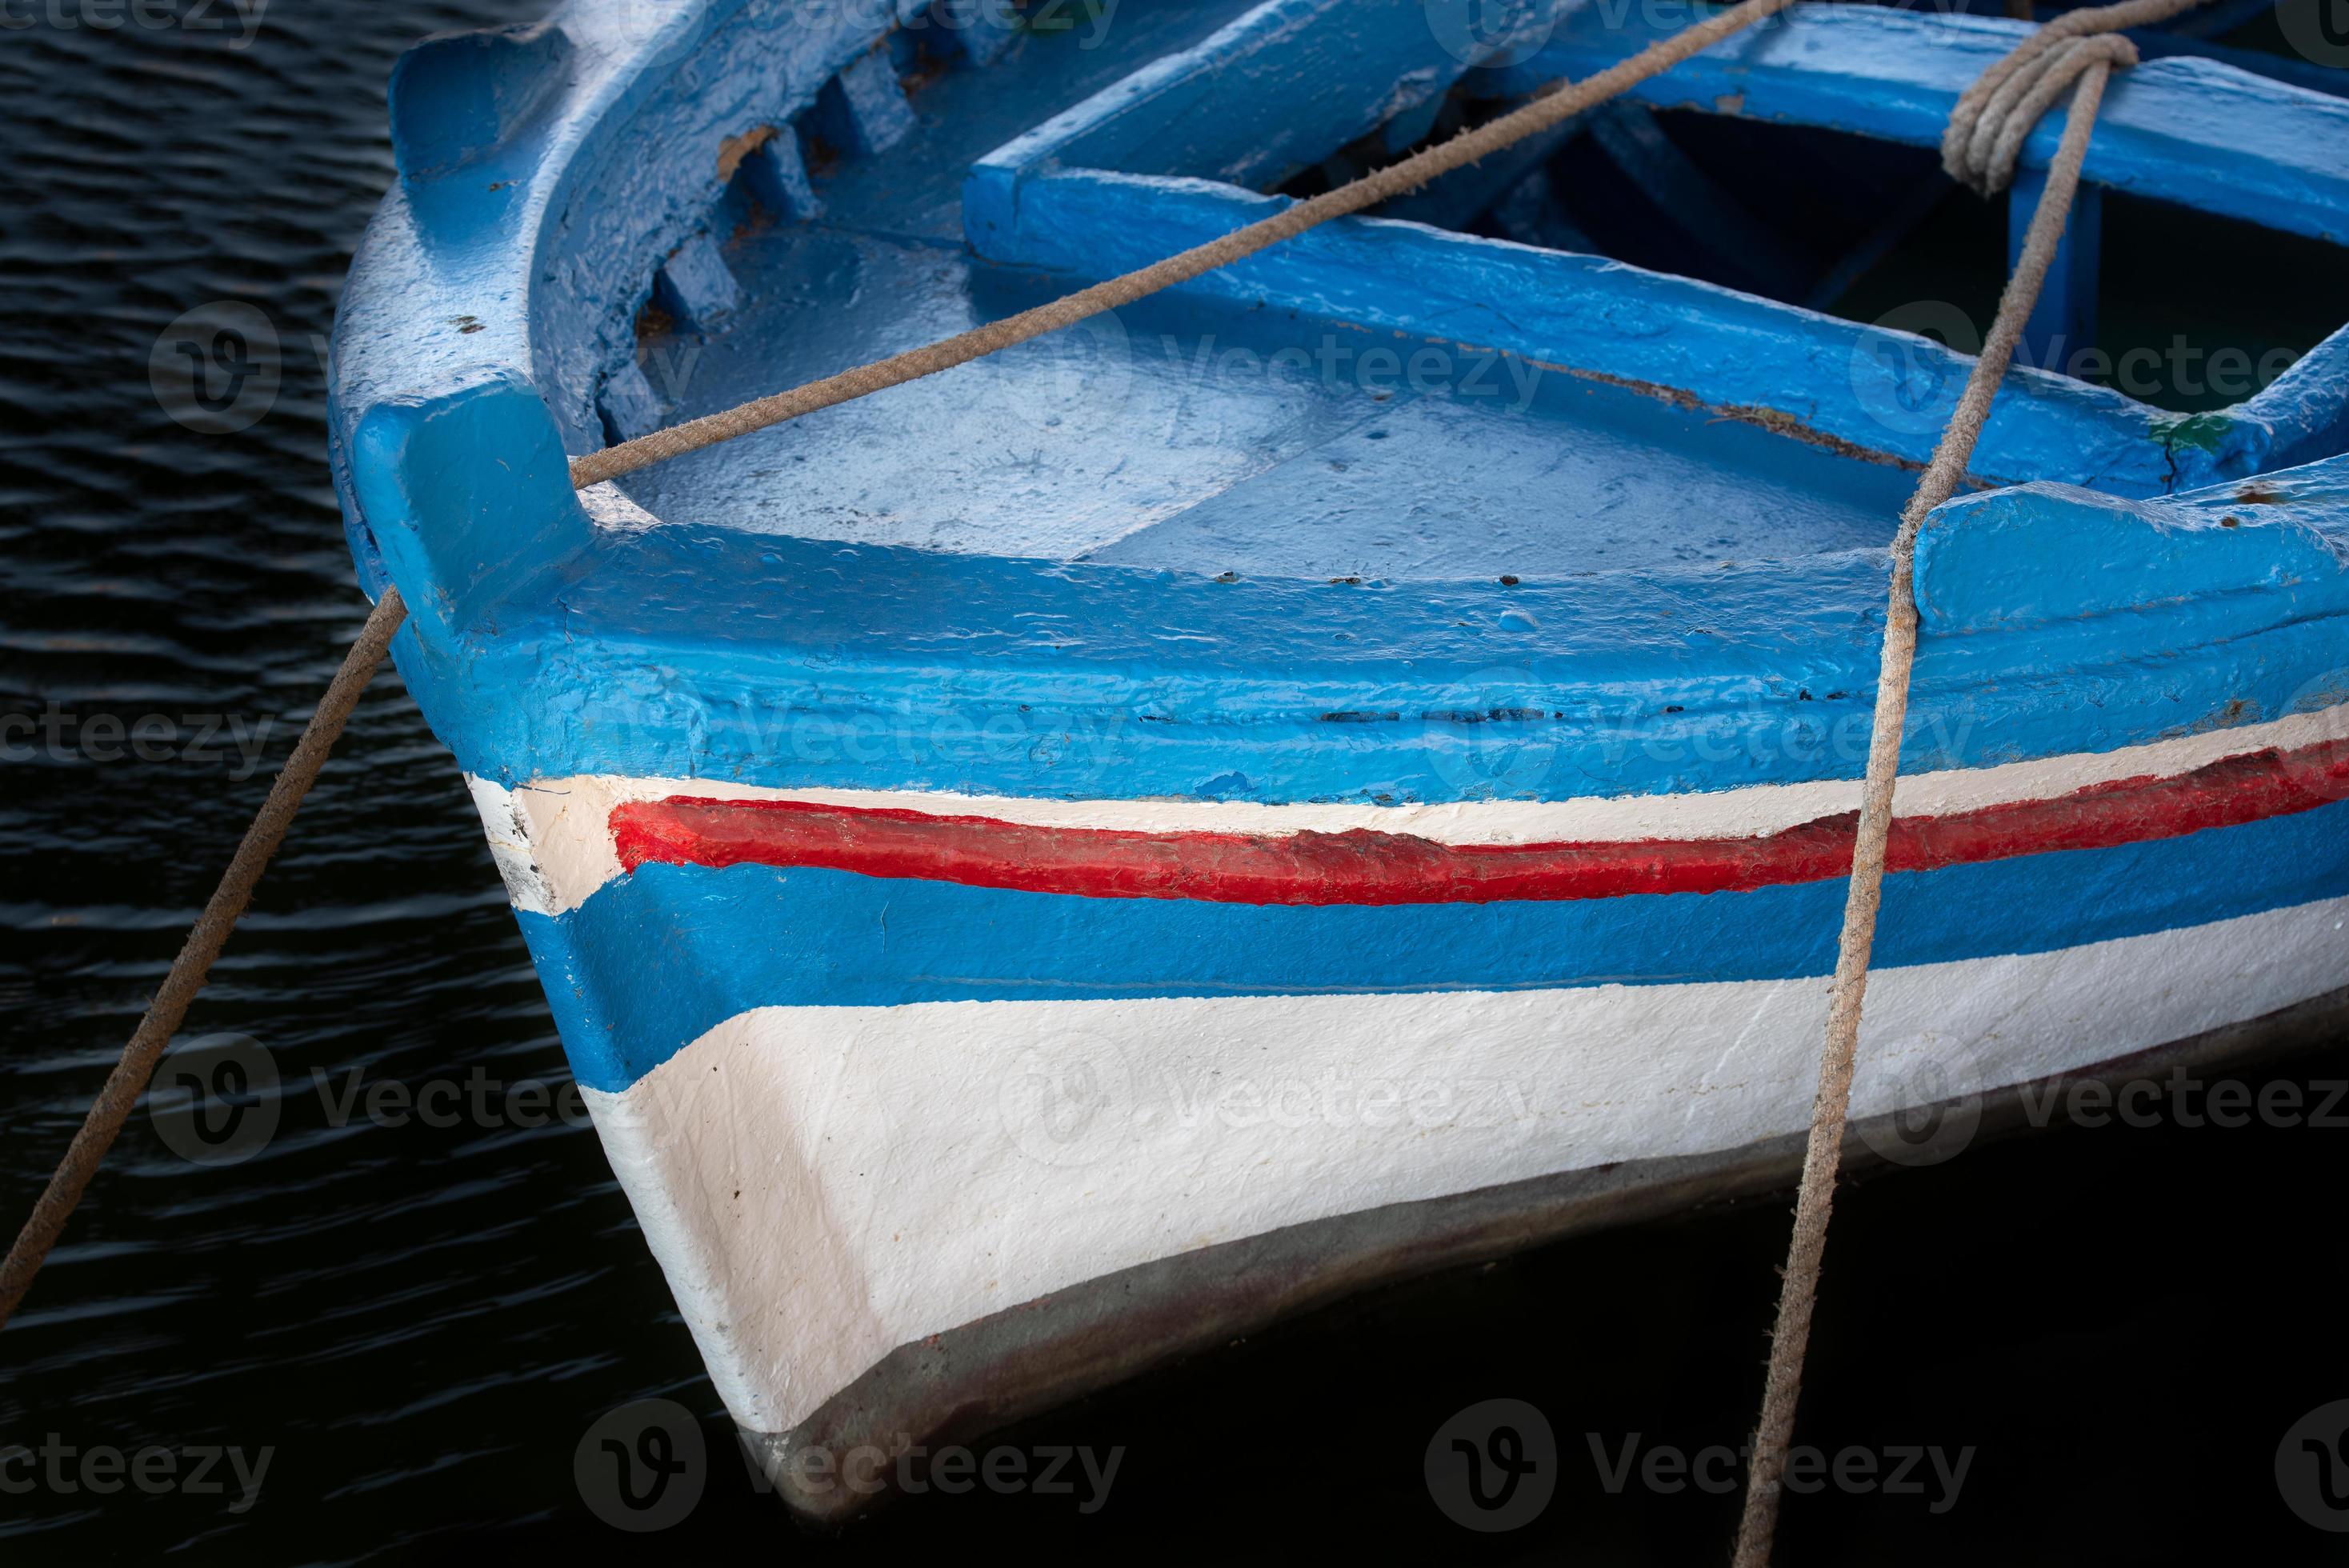 https://static.vecteezy.com/system/resources/previews/010/923/268/large_2x/close-up-and-detail-shot-of-an-old-wooden-fishing-boat-painted-in-blue-red-and-white-paint-the-boat-stands-in-the-dark-water-and-is-tied-to-the-shore-with-ropes-photo.jpg